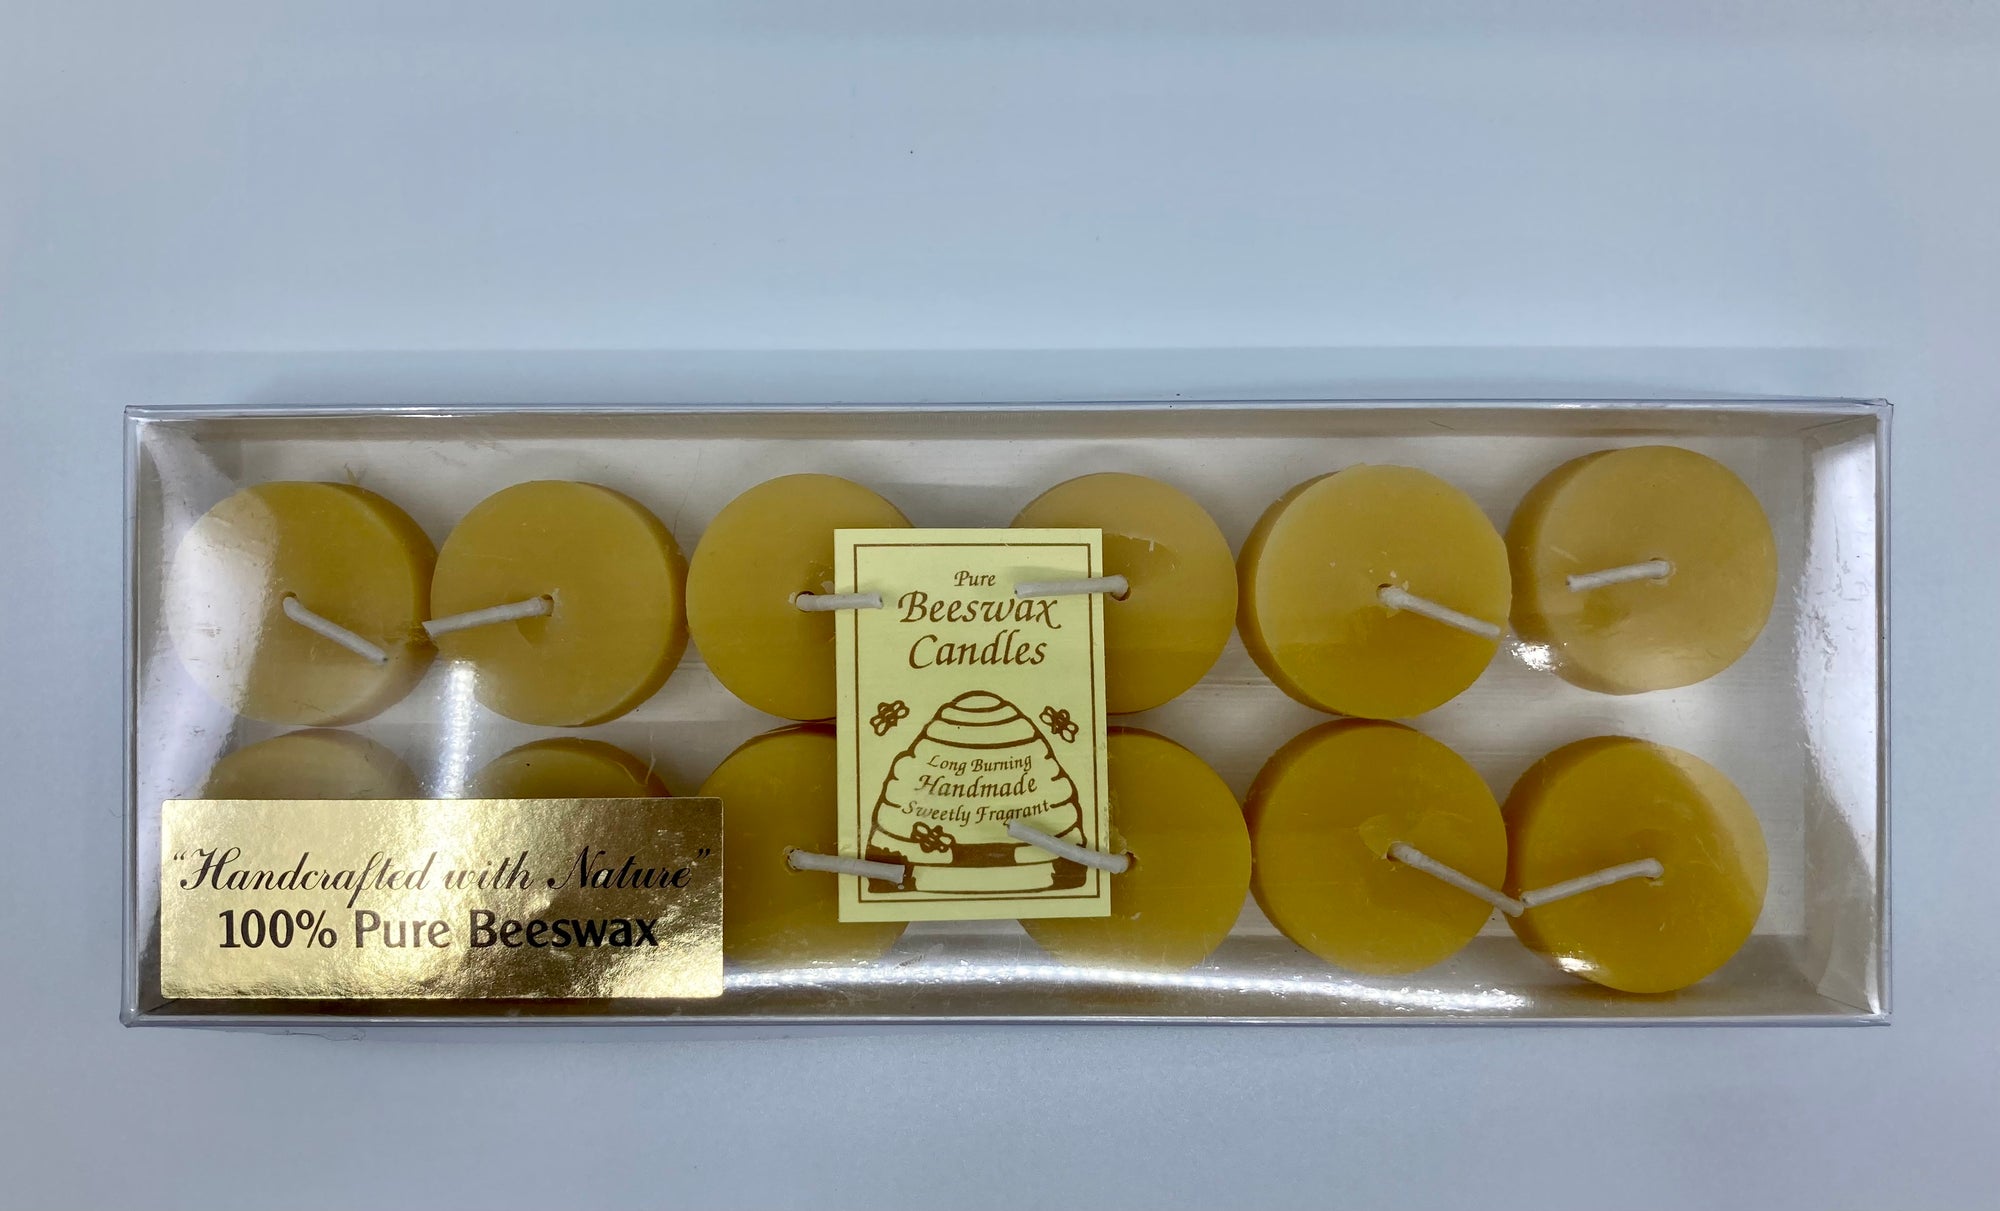 12 tea light candles made from 100% beeswax.  These candles provide the perfect relaxing ambiance and each candle will burn approximately 3-4 hours.